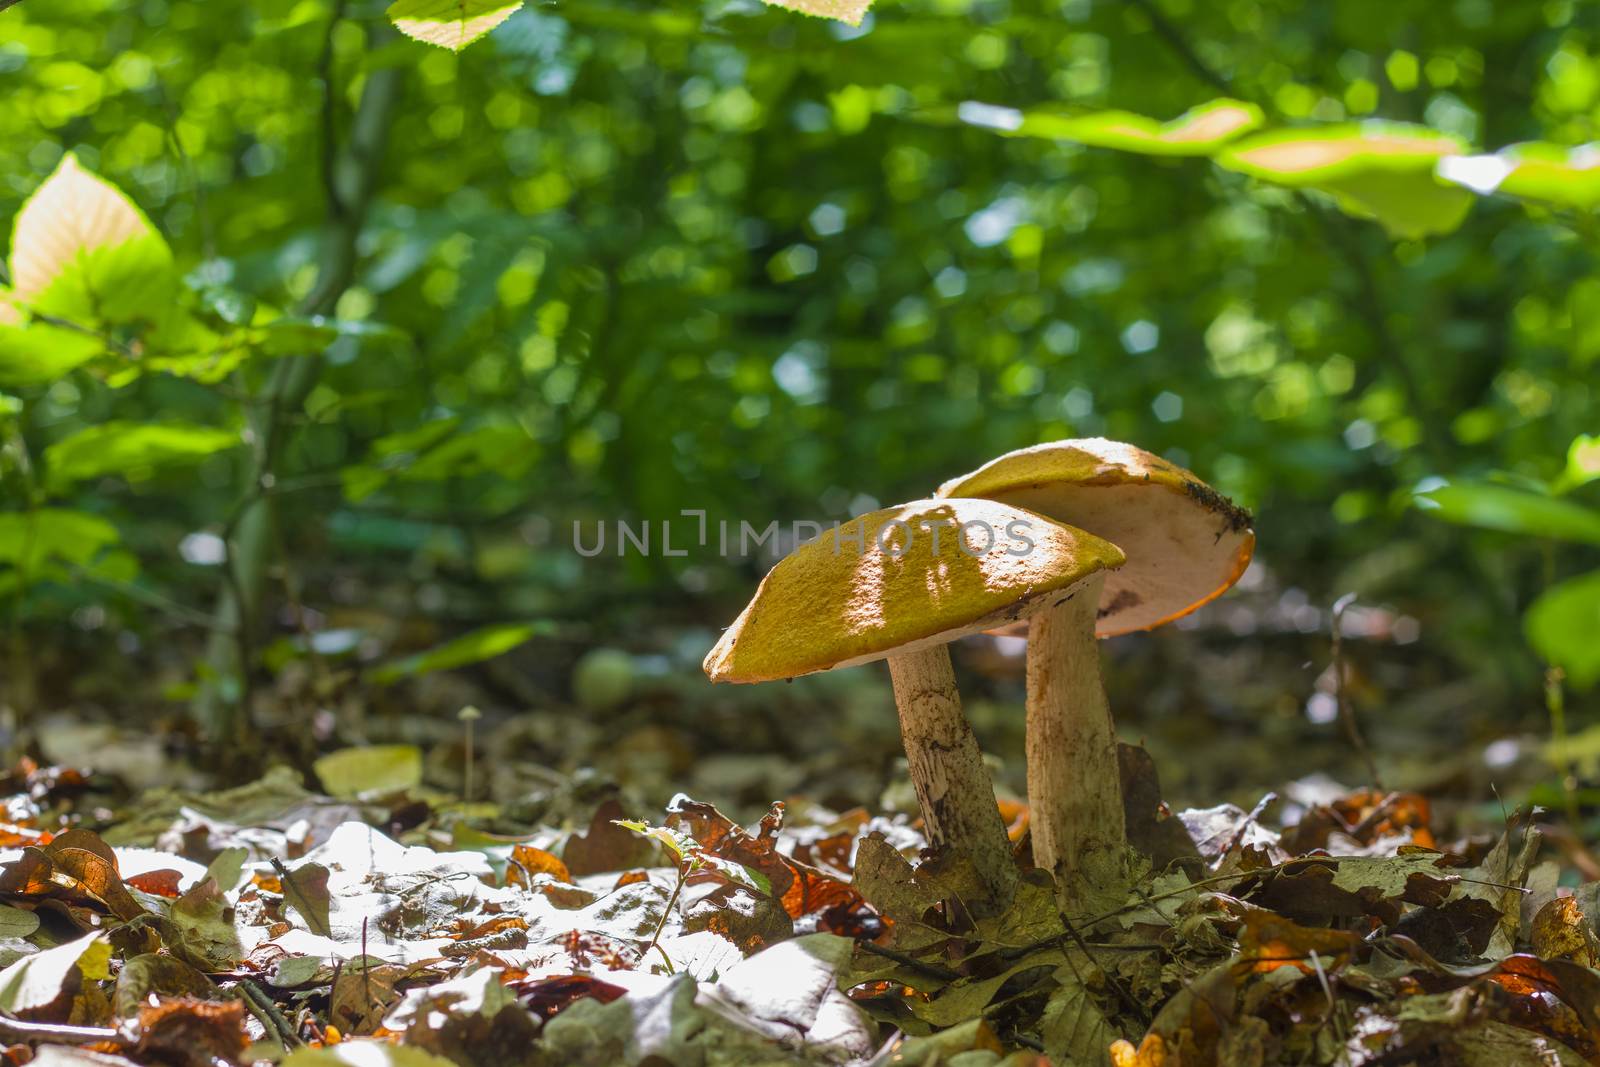 Leccinum in deciduous forest. Natural organic plants and mushroom growing in wood